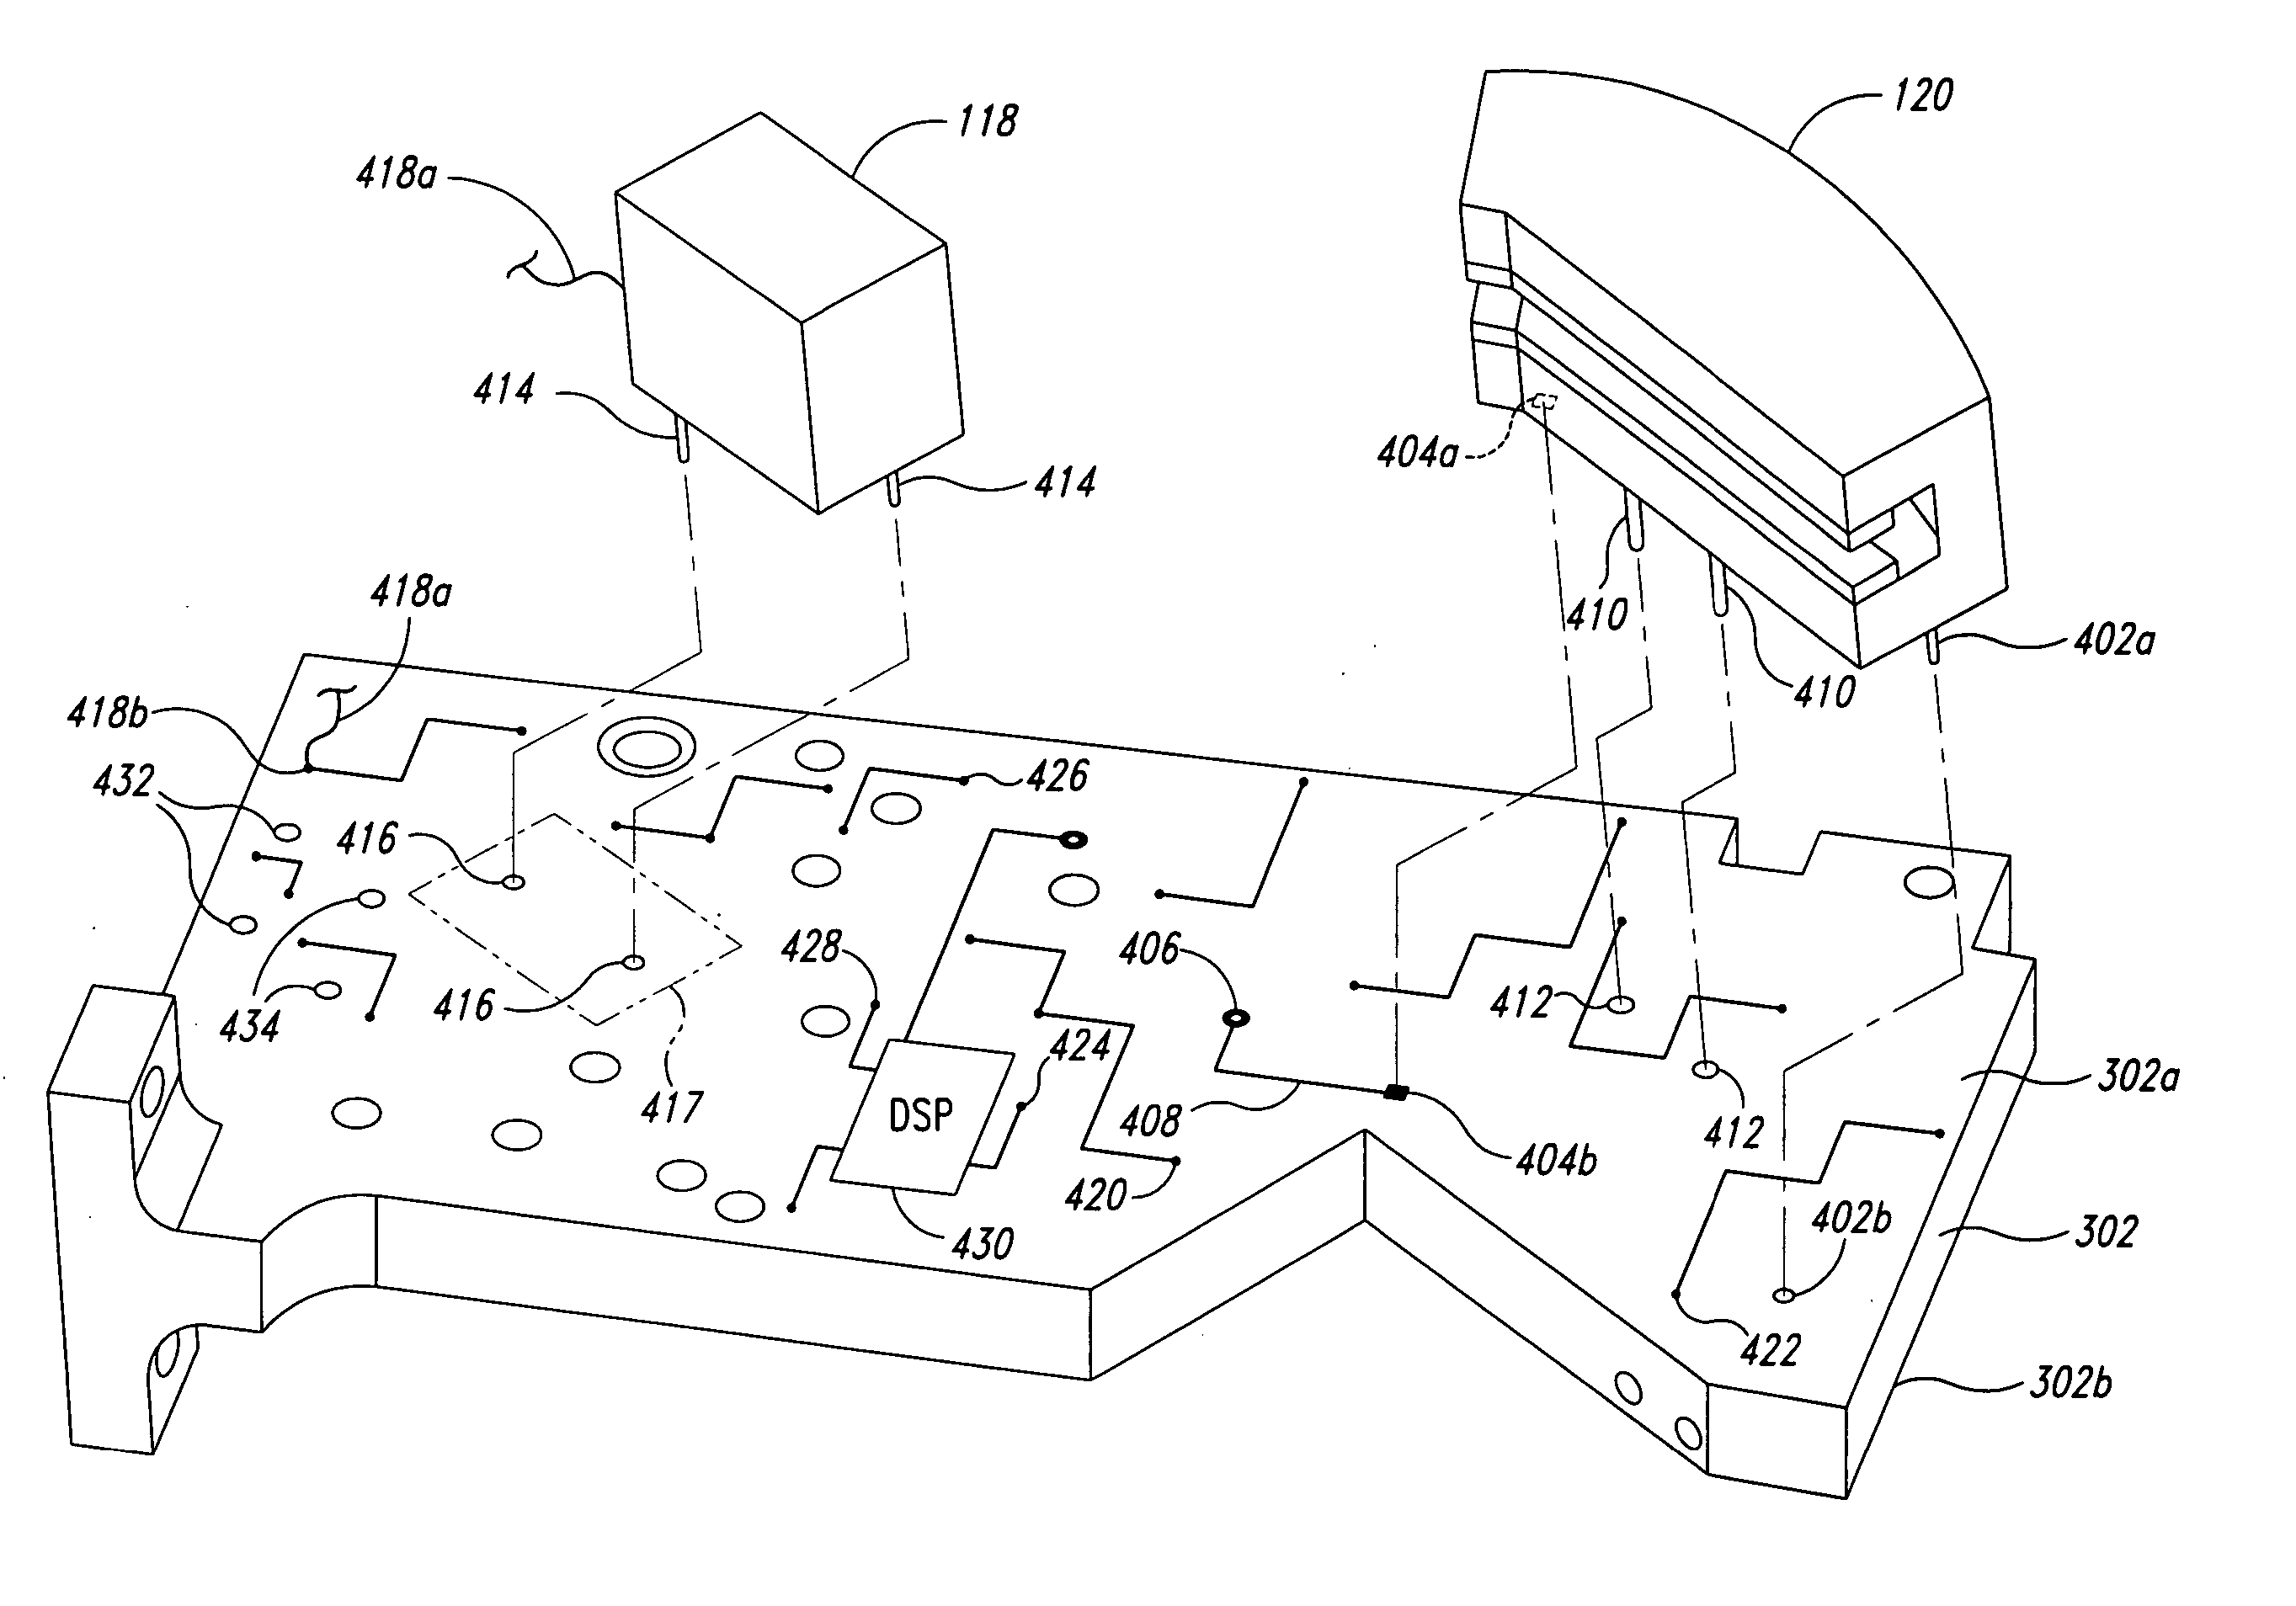 Optical bench for a mass spectrometer system